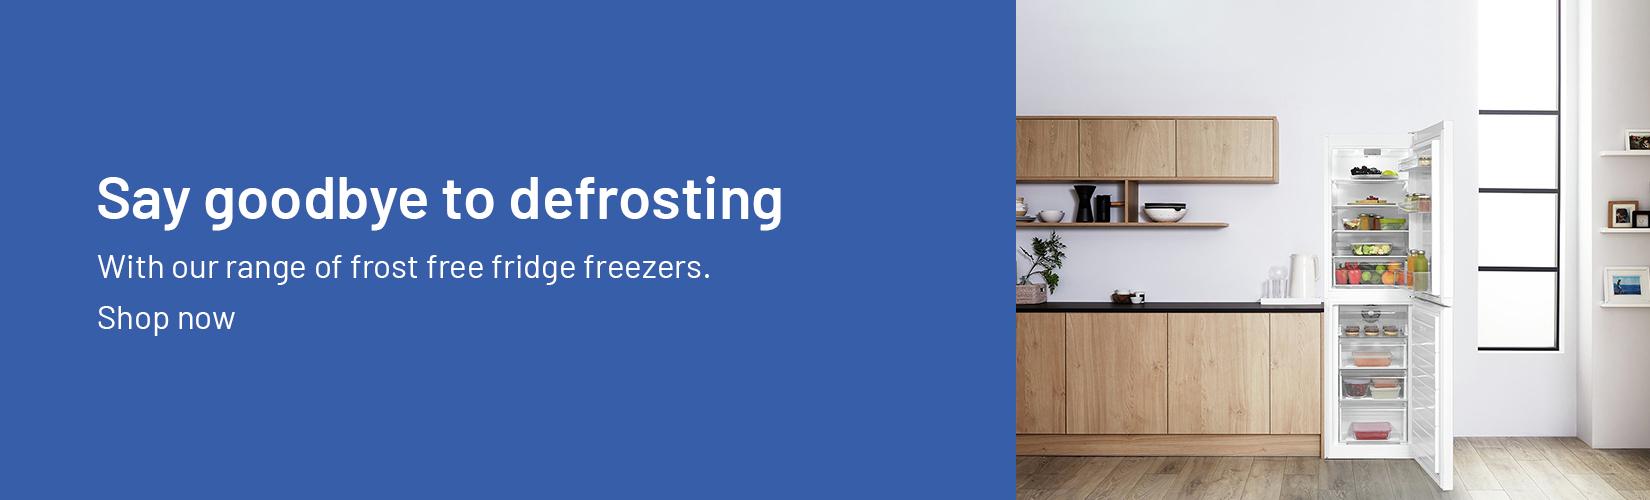 Say goodbye to defrosting.